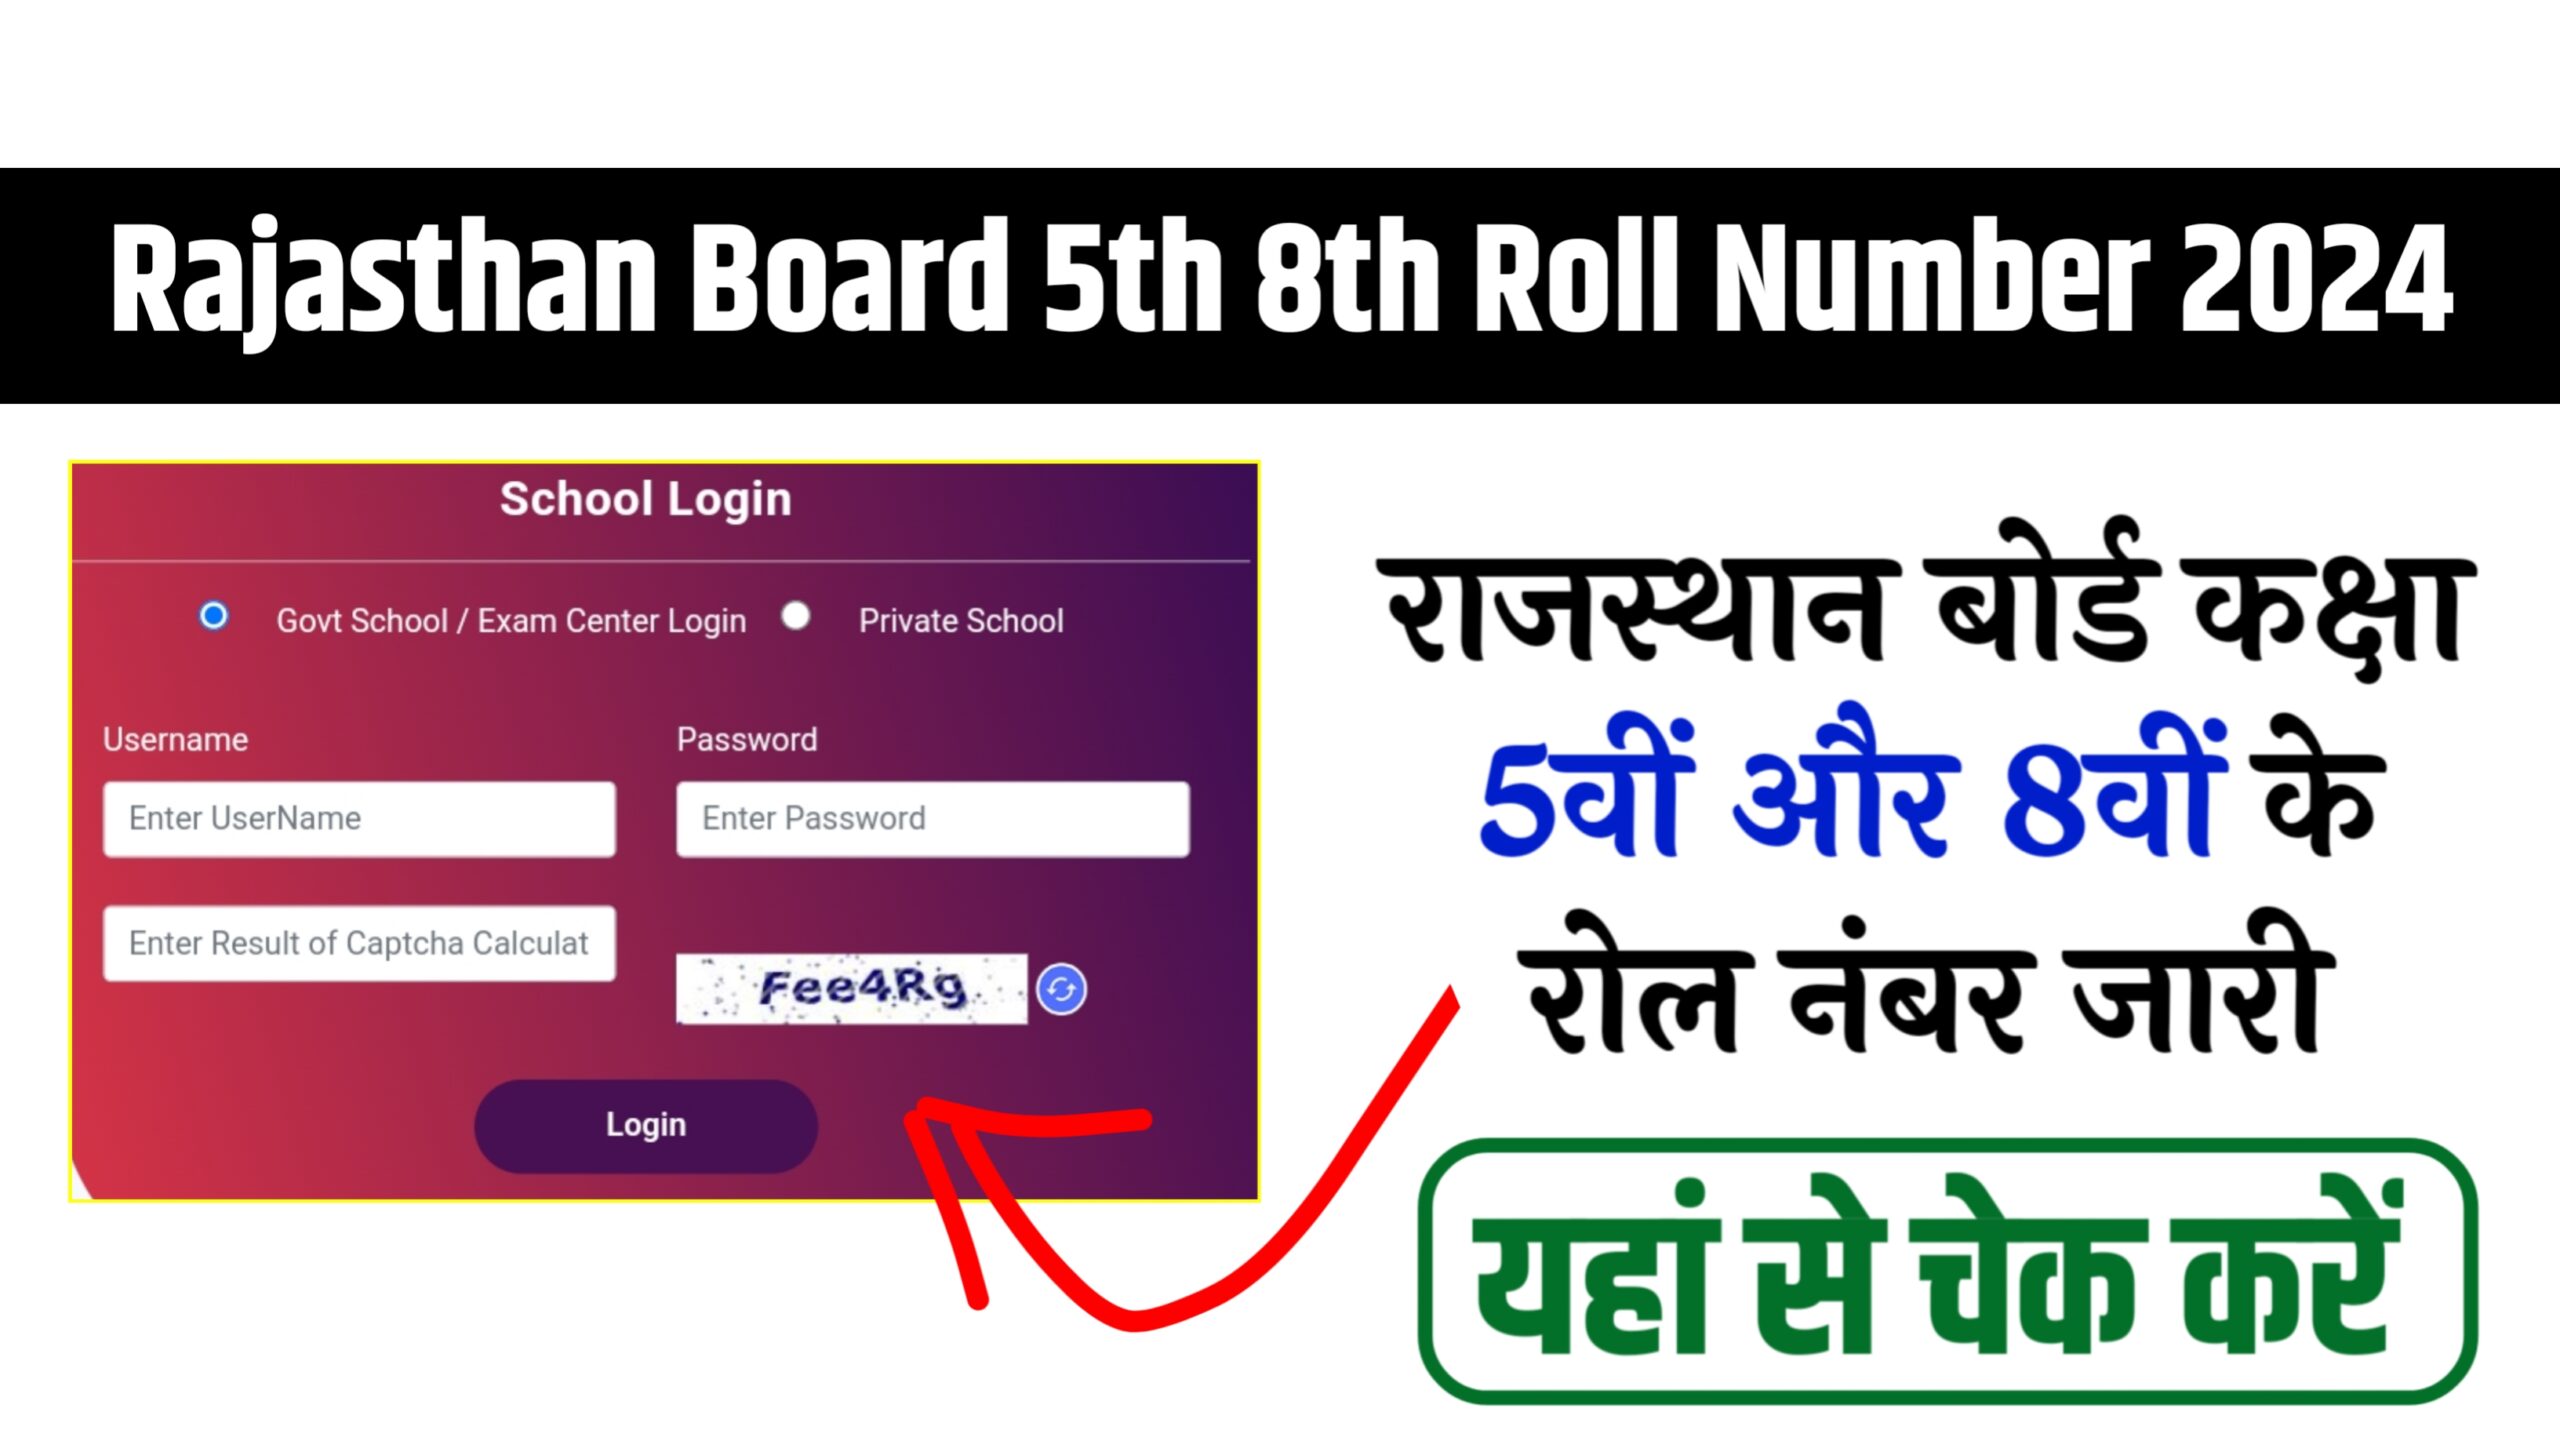 Rajasthan Board 5th 8th Roll Number 2024